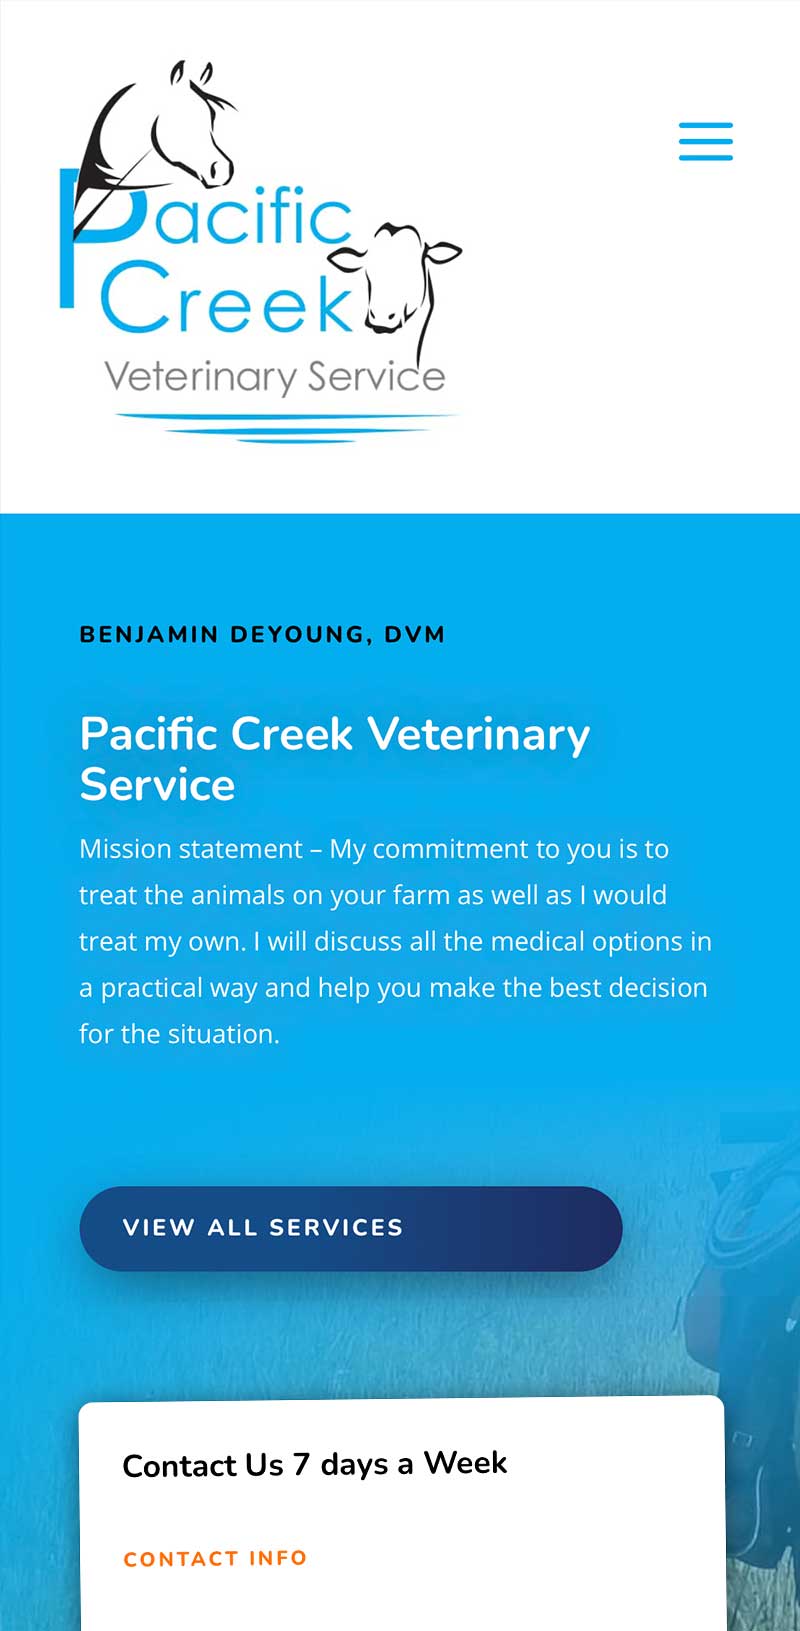 Pacific Creek Veterinary Service Website Design By Russ at RgB Design